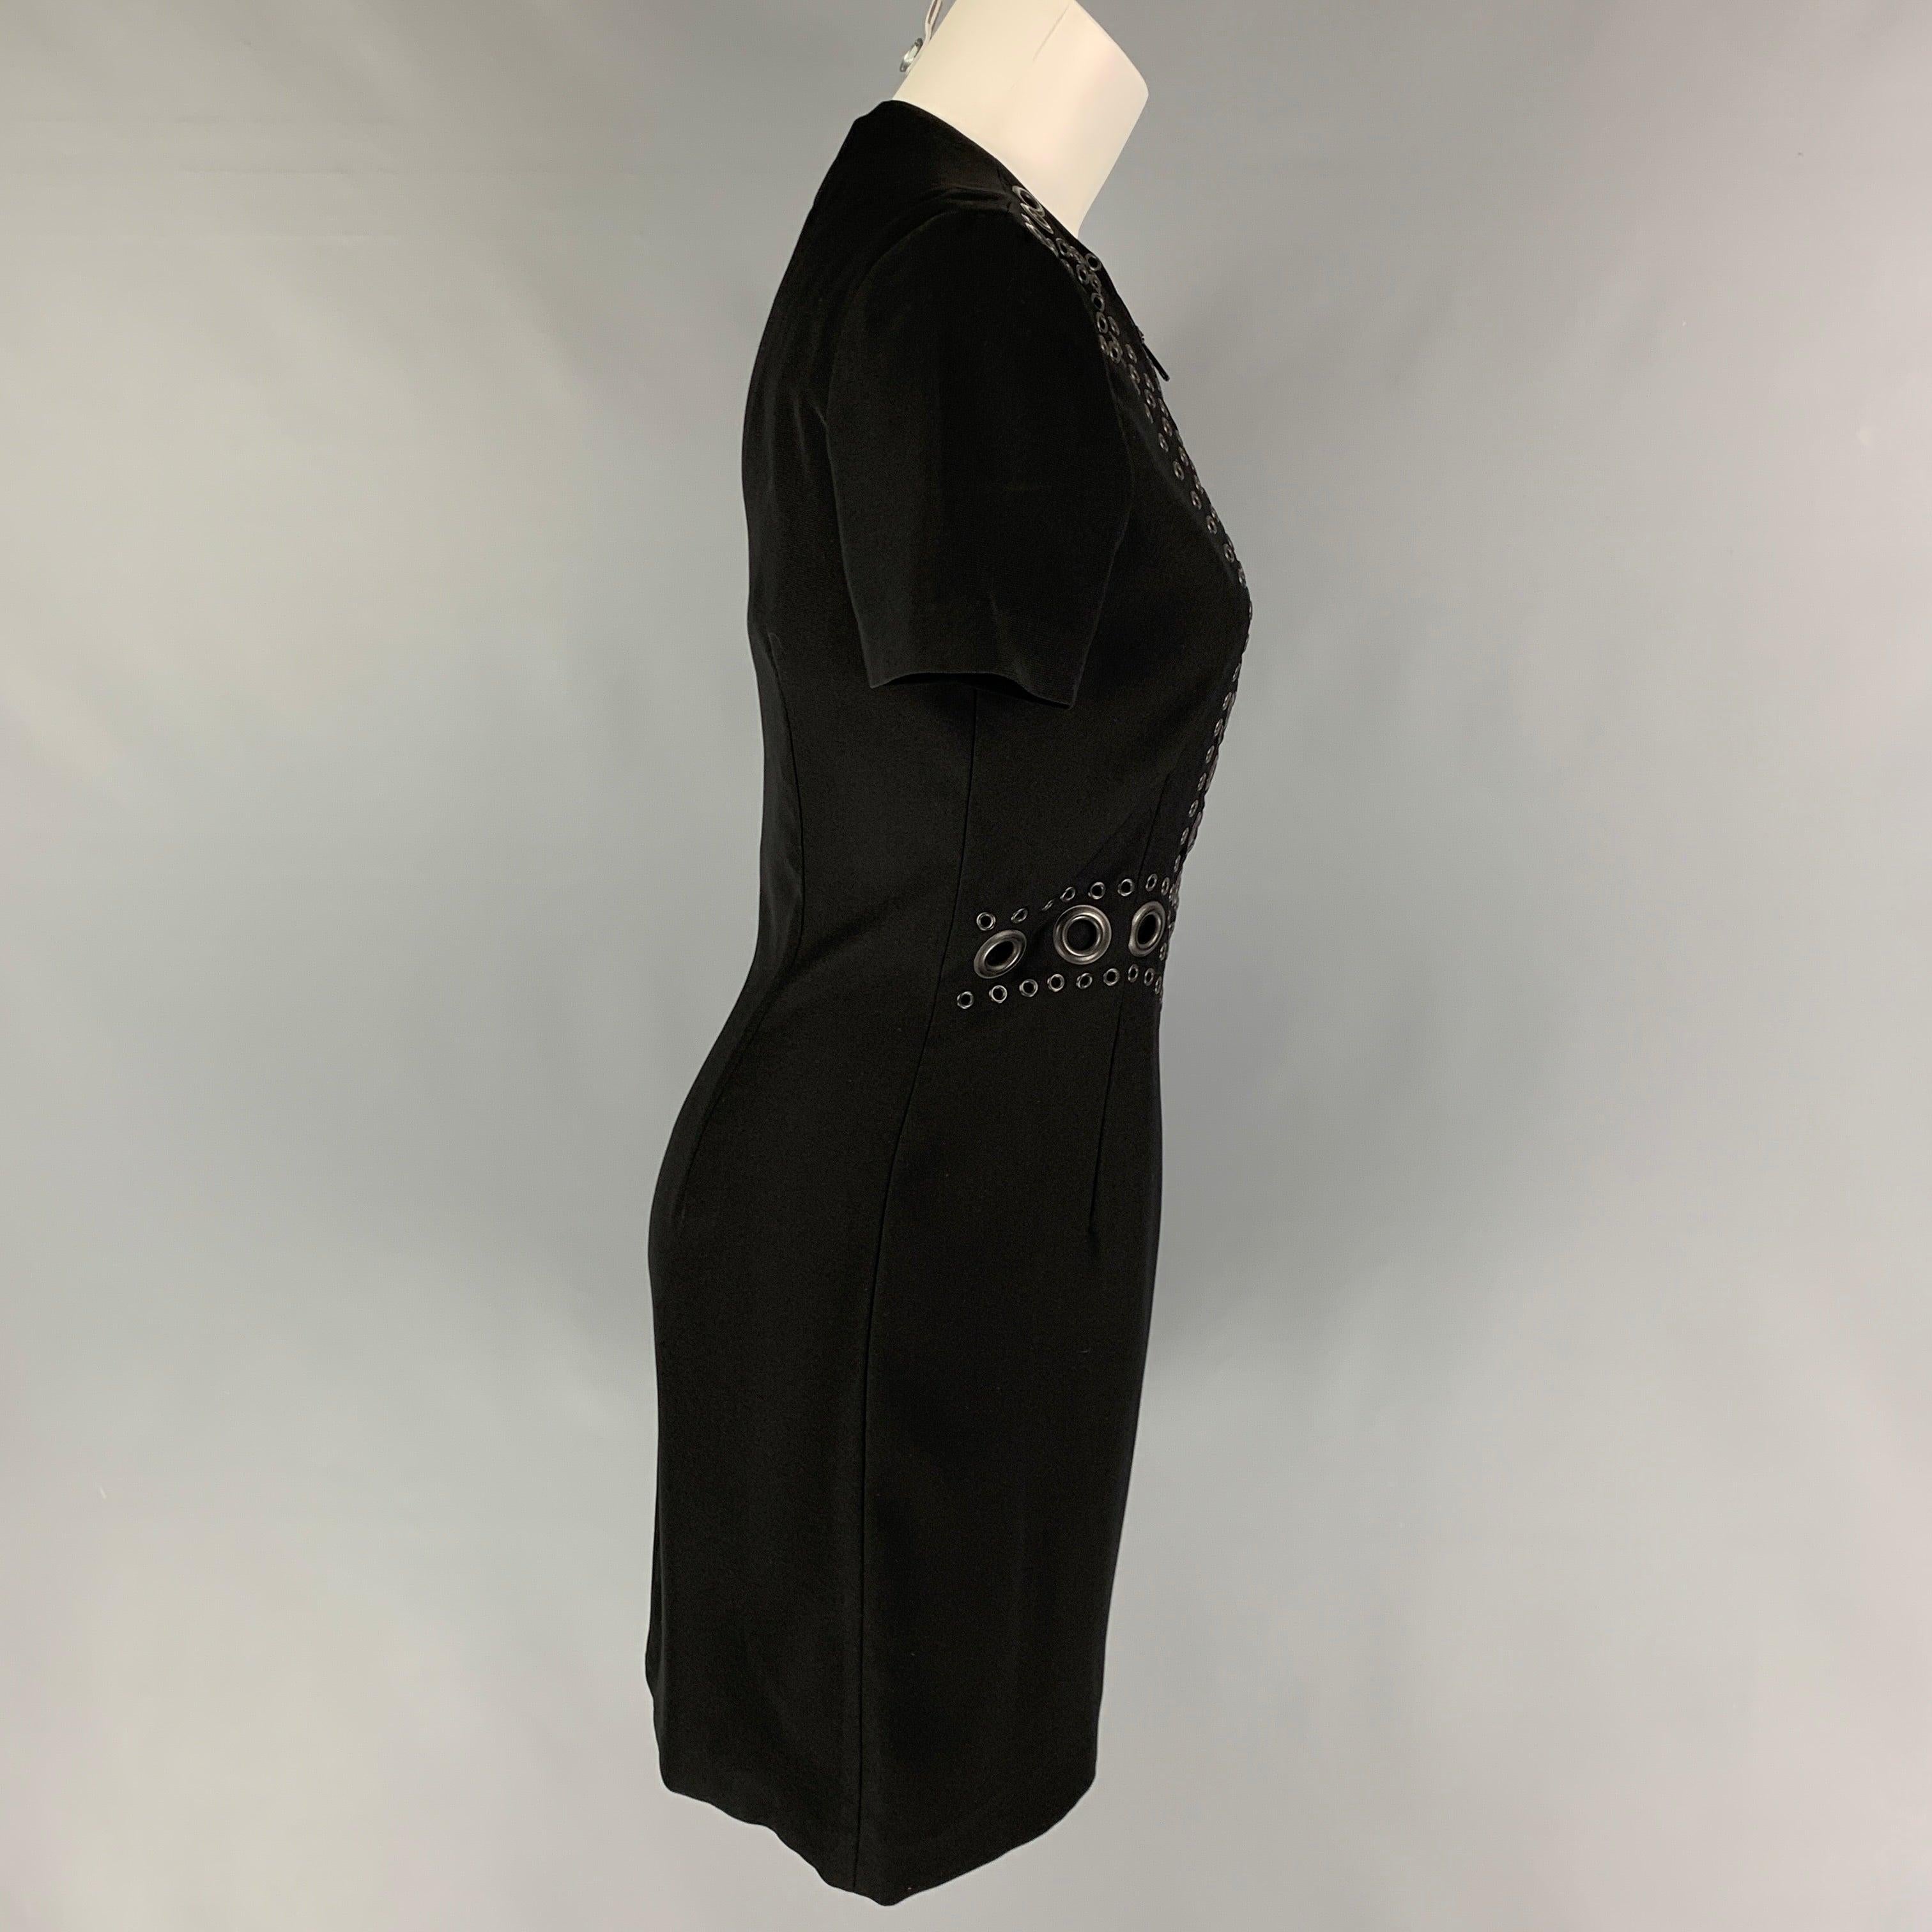 GIVENCHY dress comes in a black polyester featuring gunmetal grommet details at front, short sleeves, and a front half zip up closure.
Very Good
Pre-Owned Condition. 

Marked:   40 

Measurements: 
 
Shoulder: 15 inches  Bust: 33 inches  Waist: 28